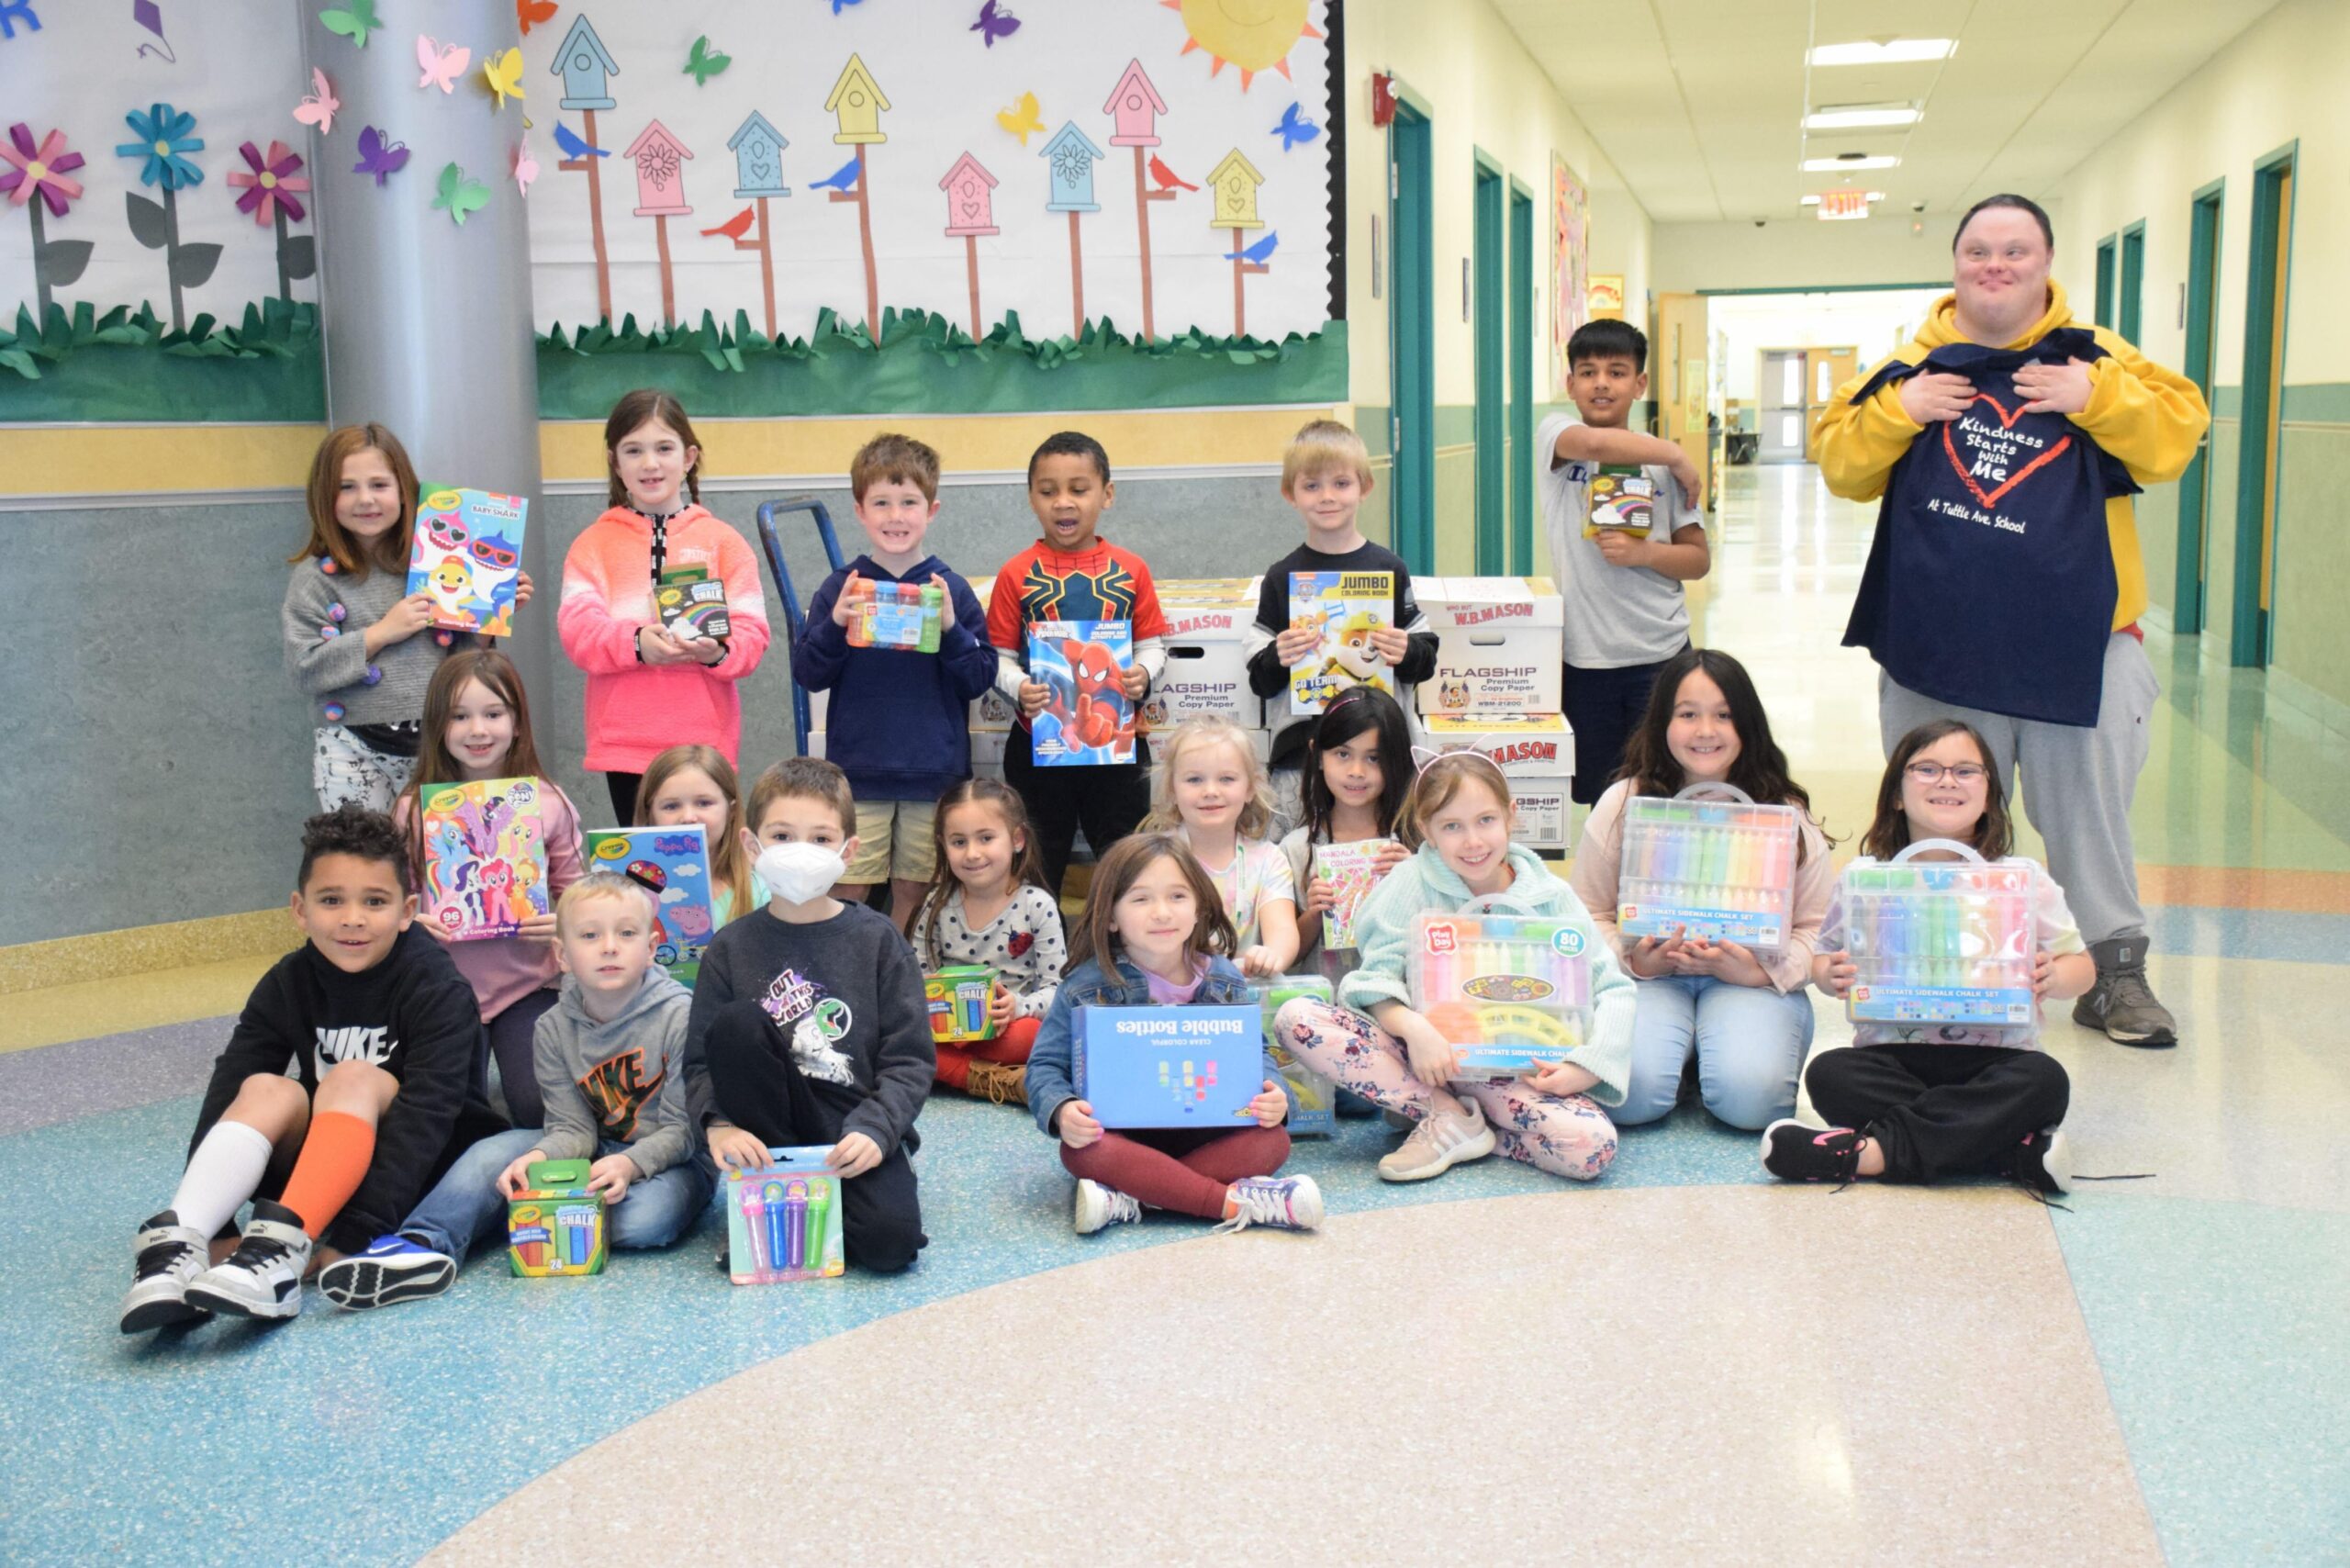 Tuttle Avenue Elementary School students in the Tuttle Cares Club led by teacher Nicole Rau recently completed a fundraising effort to benefit the Helping Makes U Happy organization. COURTESY EASTPORT-SOUTH MANOR SCHOOL DISTRICT